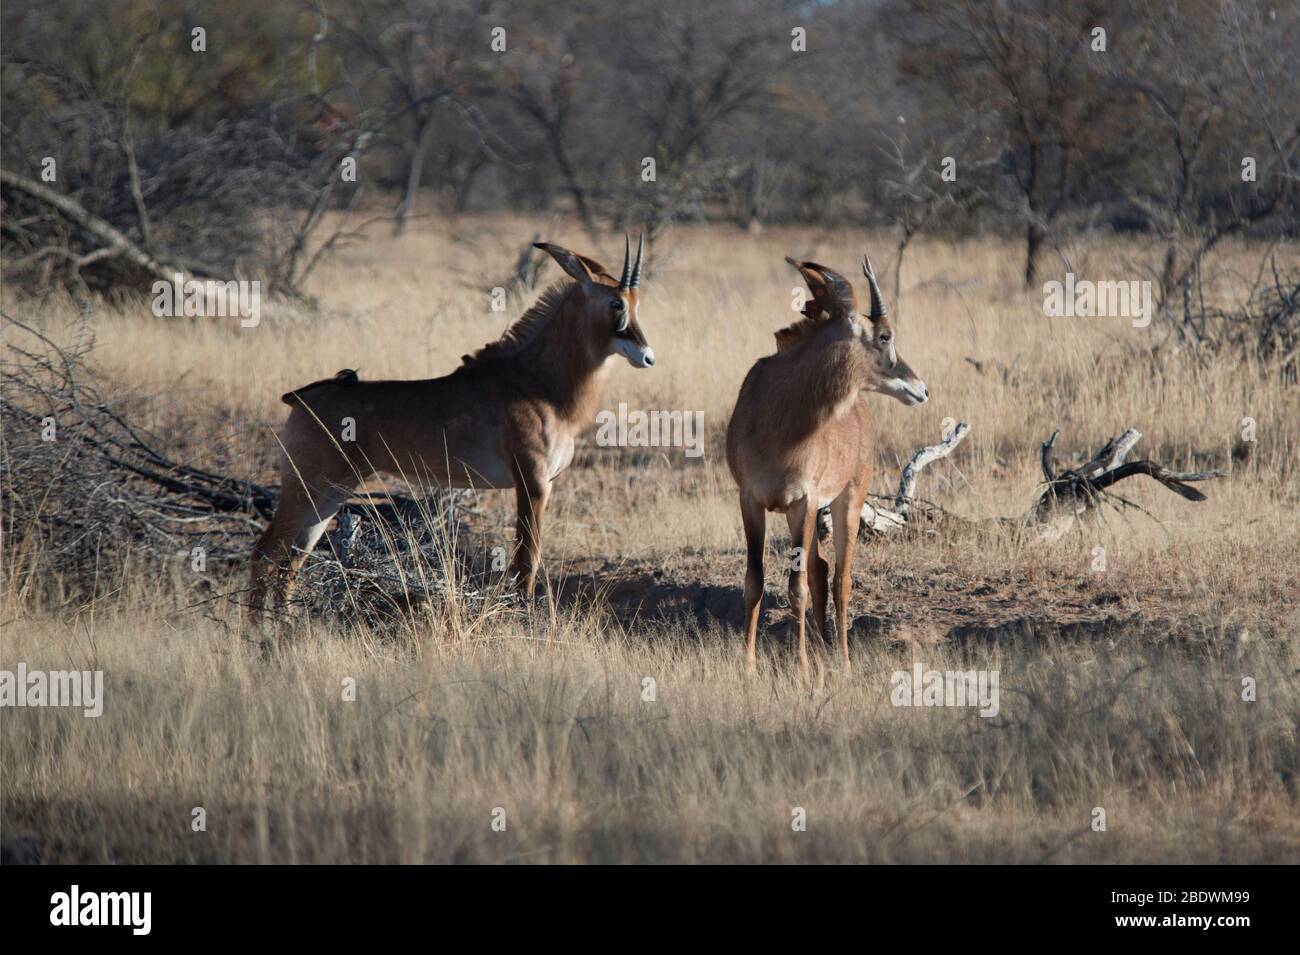 Roan Antelope, Hippotragus equinus, pair, Ant's Hill Reserve, near Vaalwater, Limpopo province, South Africa Stock Photo